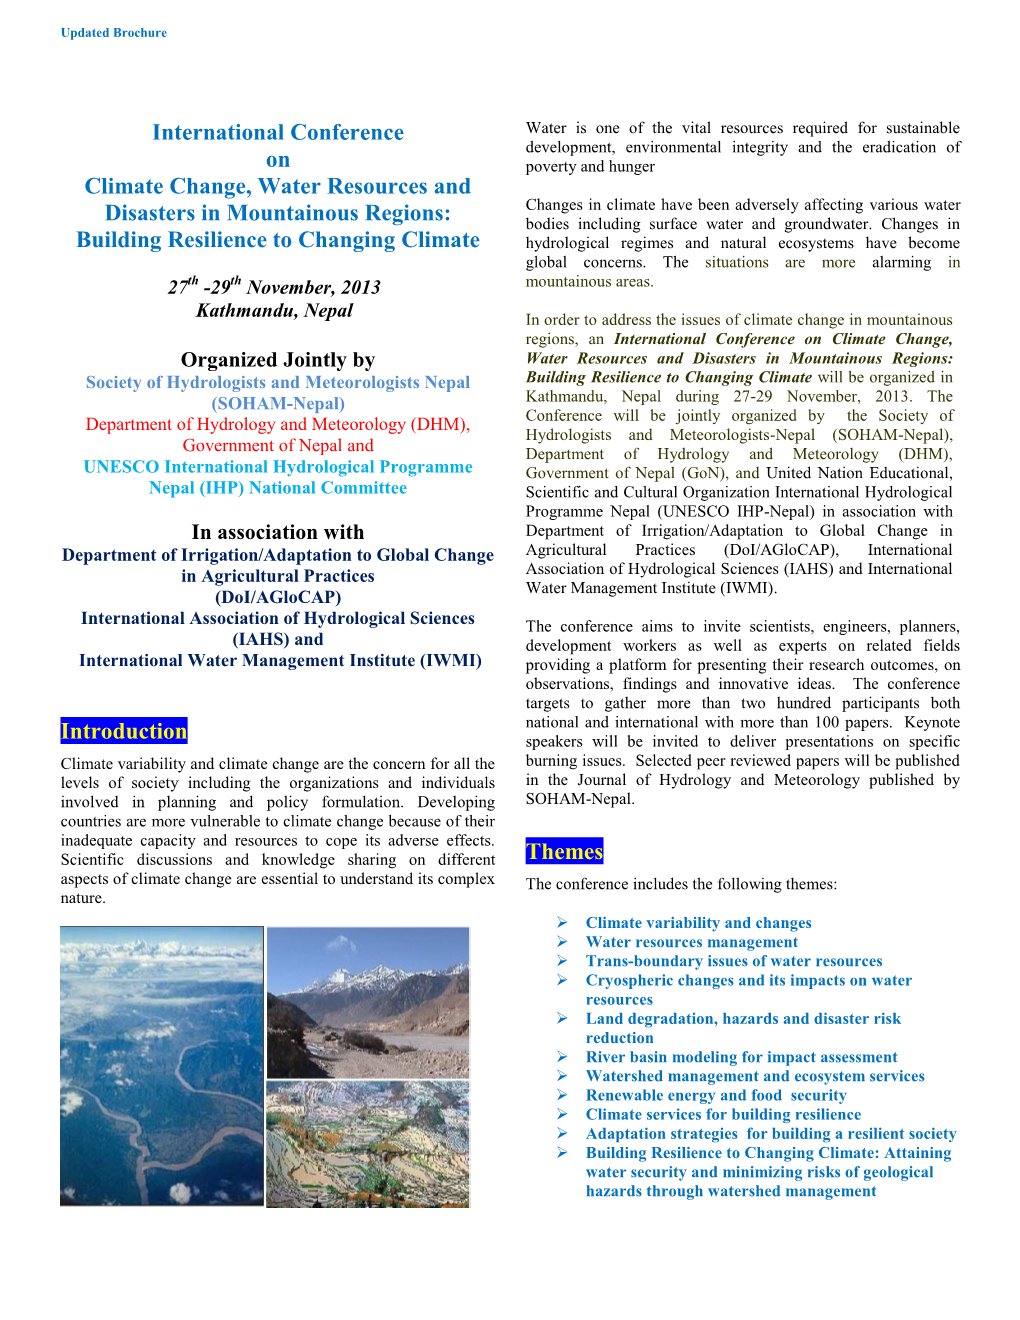 Conference on Climate Change from the Society of Hydrologists And